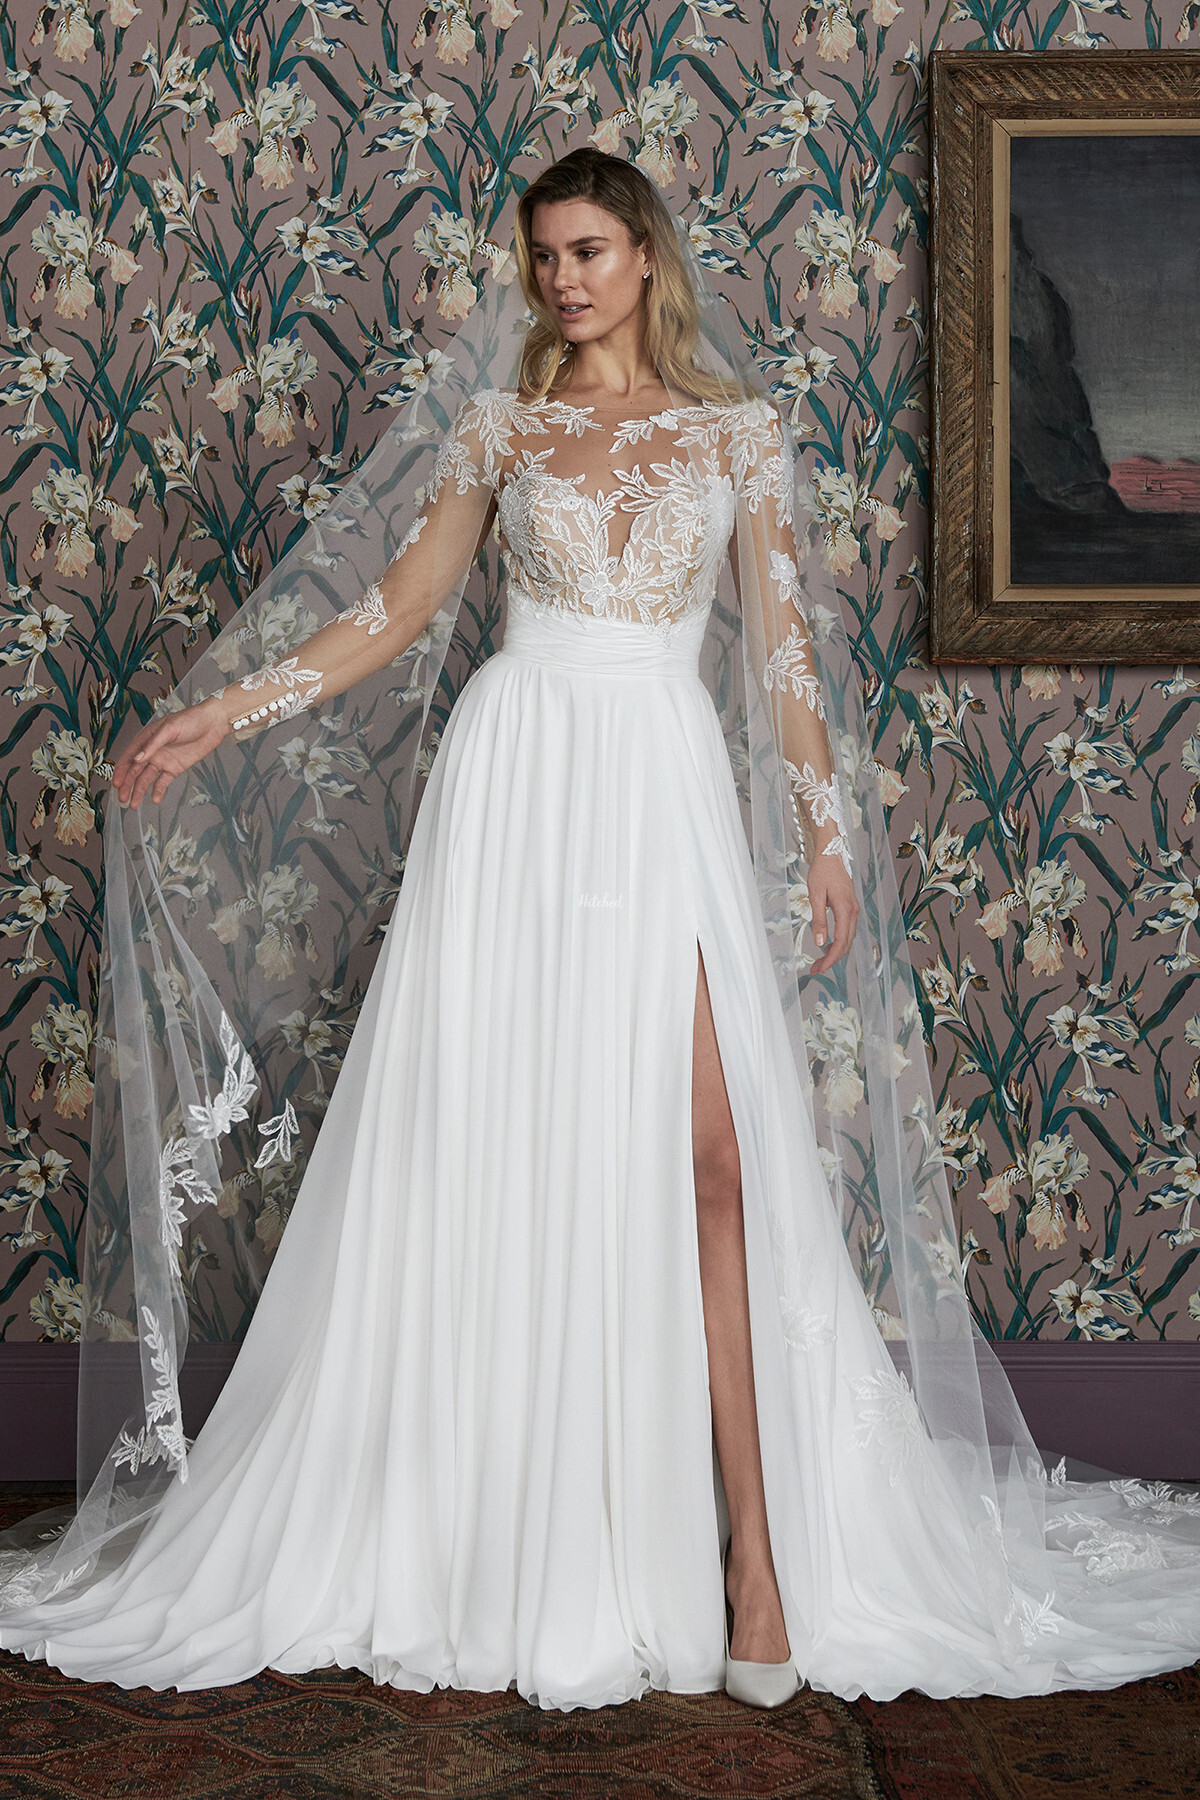 adderley Wedding Dress from Justin Alexander Signature - hitched.co.uk